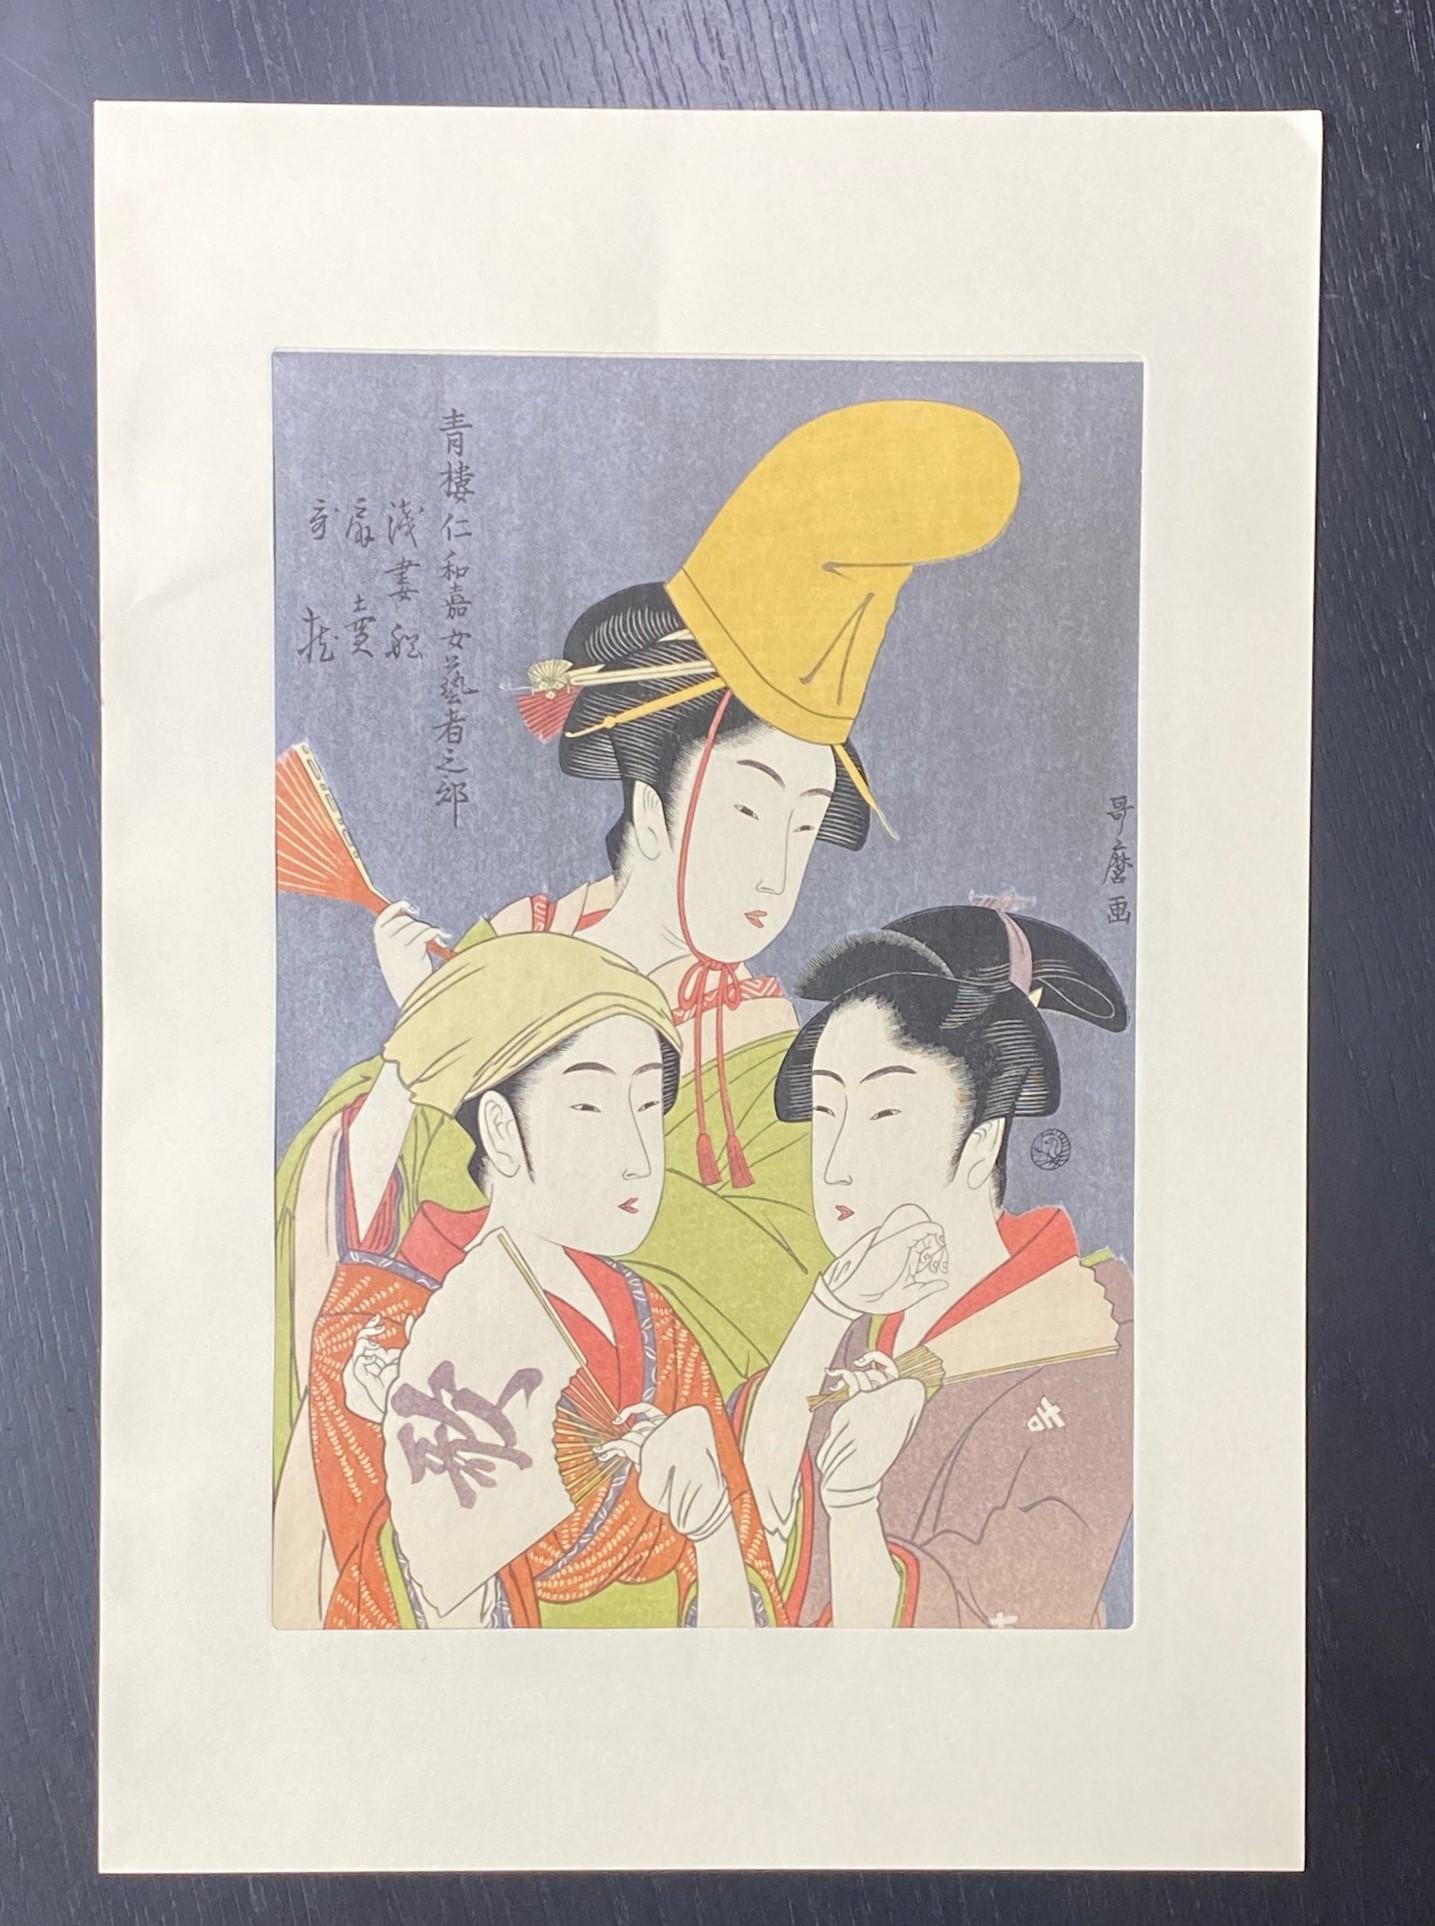 A wonderfully composed and beautifully colored Japanese woodblock print featuring three Edo Era fan-wielding gossiping women, perhaps Geishas, one seemingly holding court standing above with quite a brightly colored yellow hat.  Printed with a